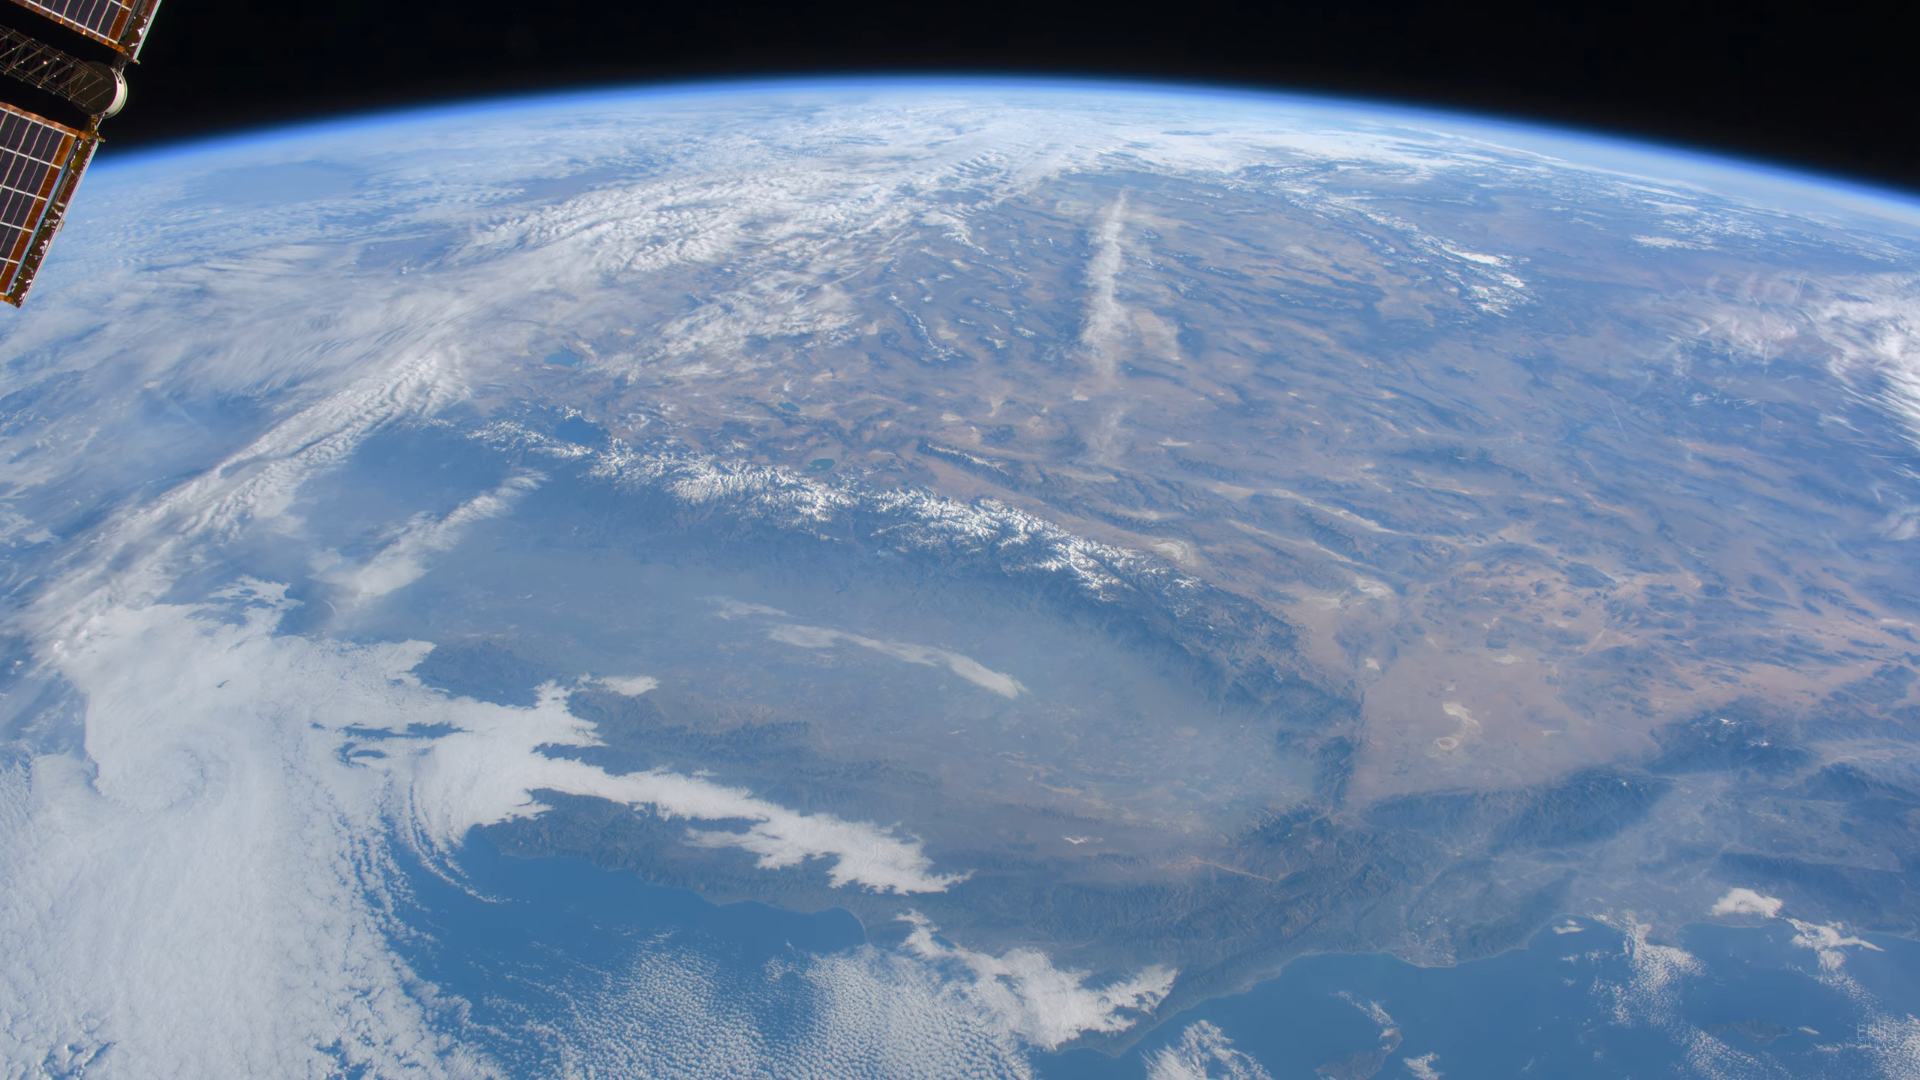 General 1920x1080 satellite satellite photo NASA USA California clouds North America continents planet mountain chain mountains atmosphere ocean view solar panel space globes desert space station Los Angeles Las Vegas west coast